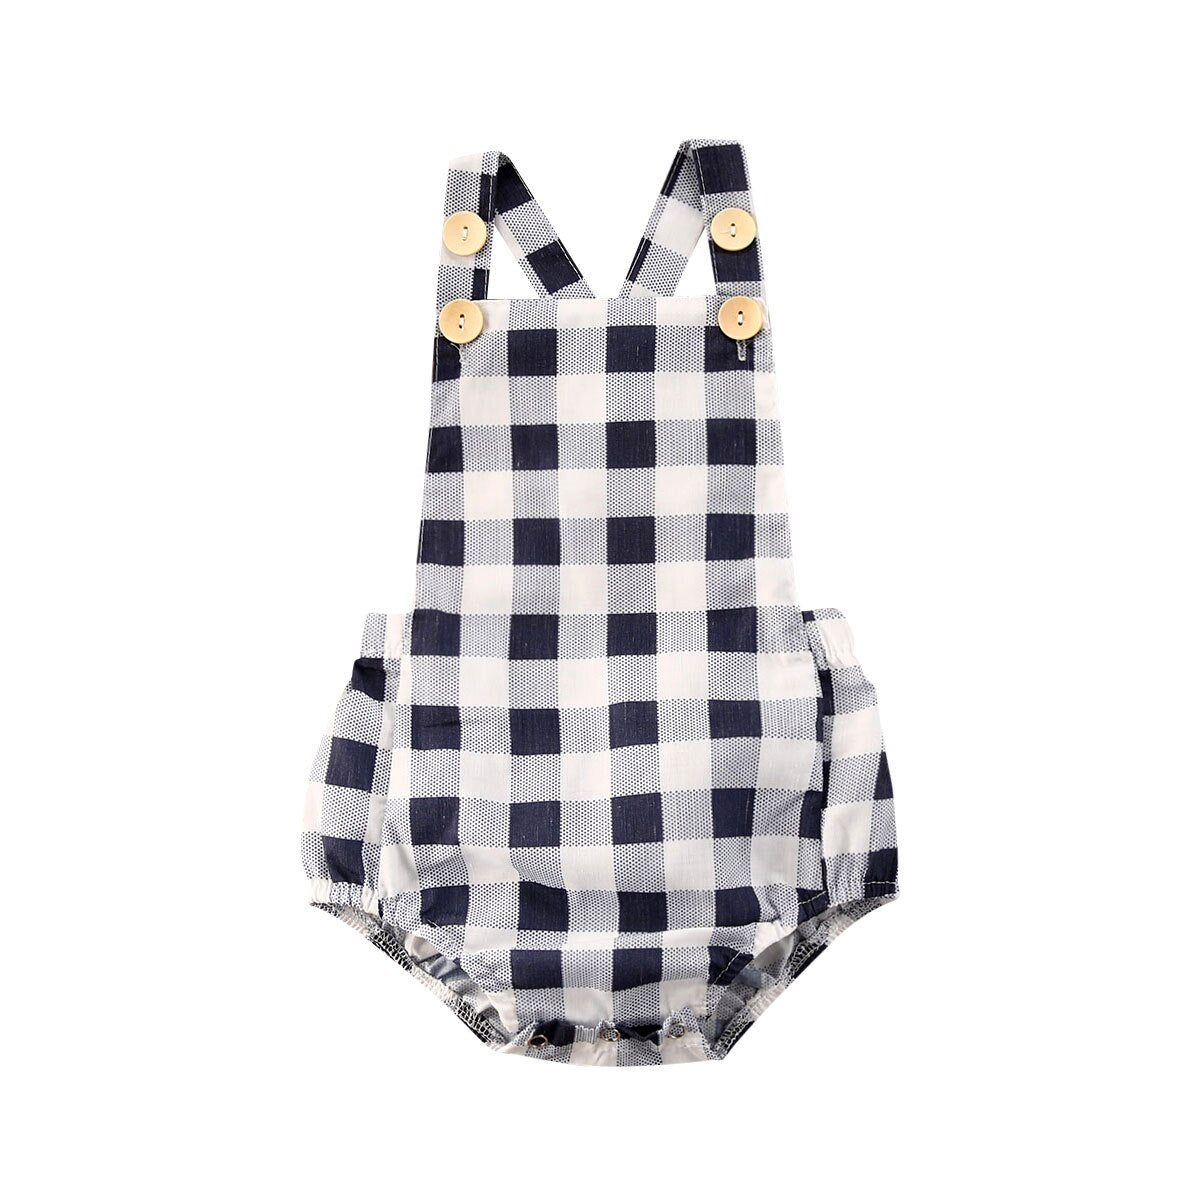 Summer Baby Clothing: Cute Sleeveless Plaid Romper Jumpsuit for Newborn Toddler Girls and Boys